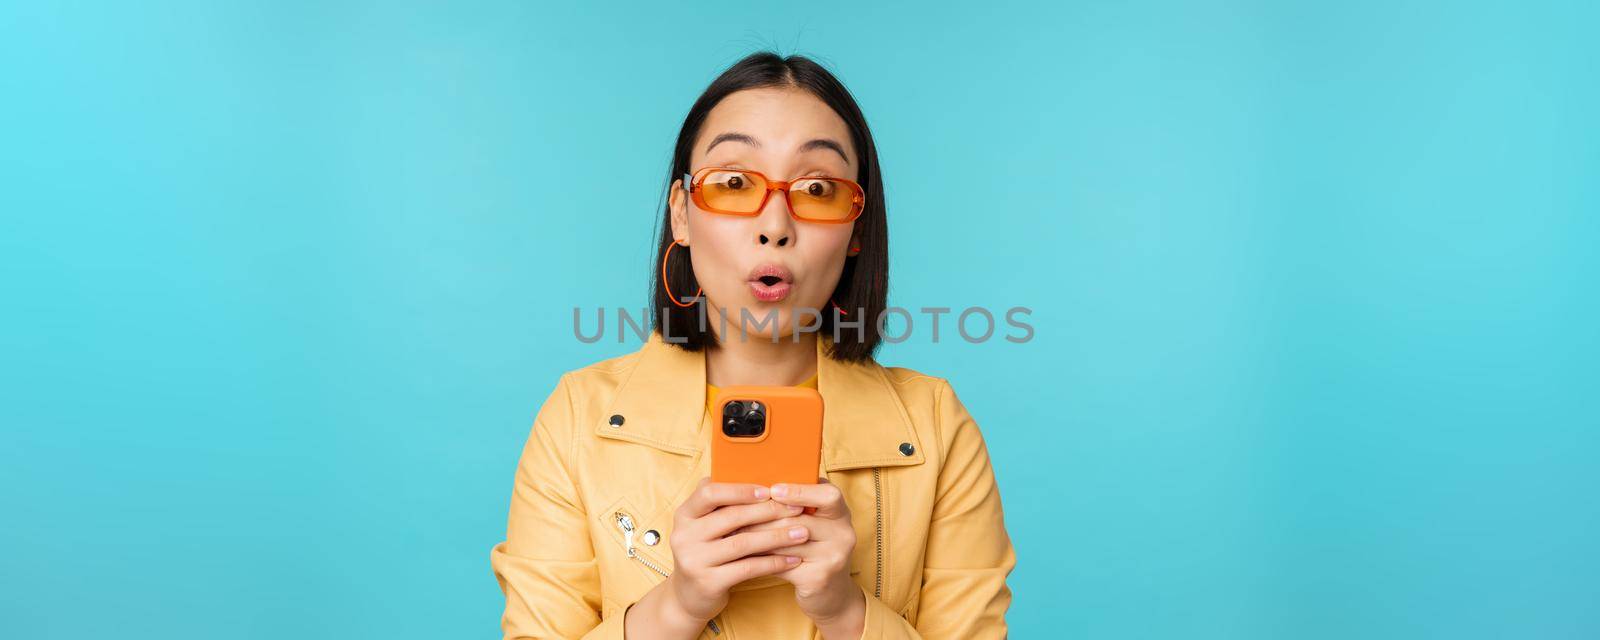 Image of asian girl in sunglasses, looking amazed and impressed, recording video or taking photo on smartphone, standing over blue background.